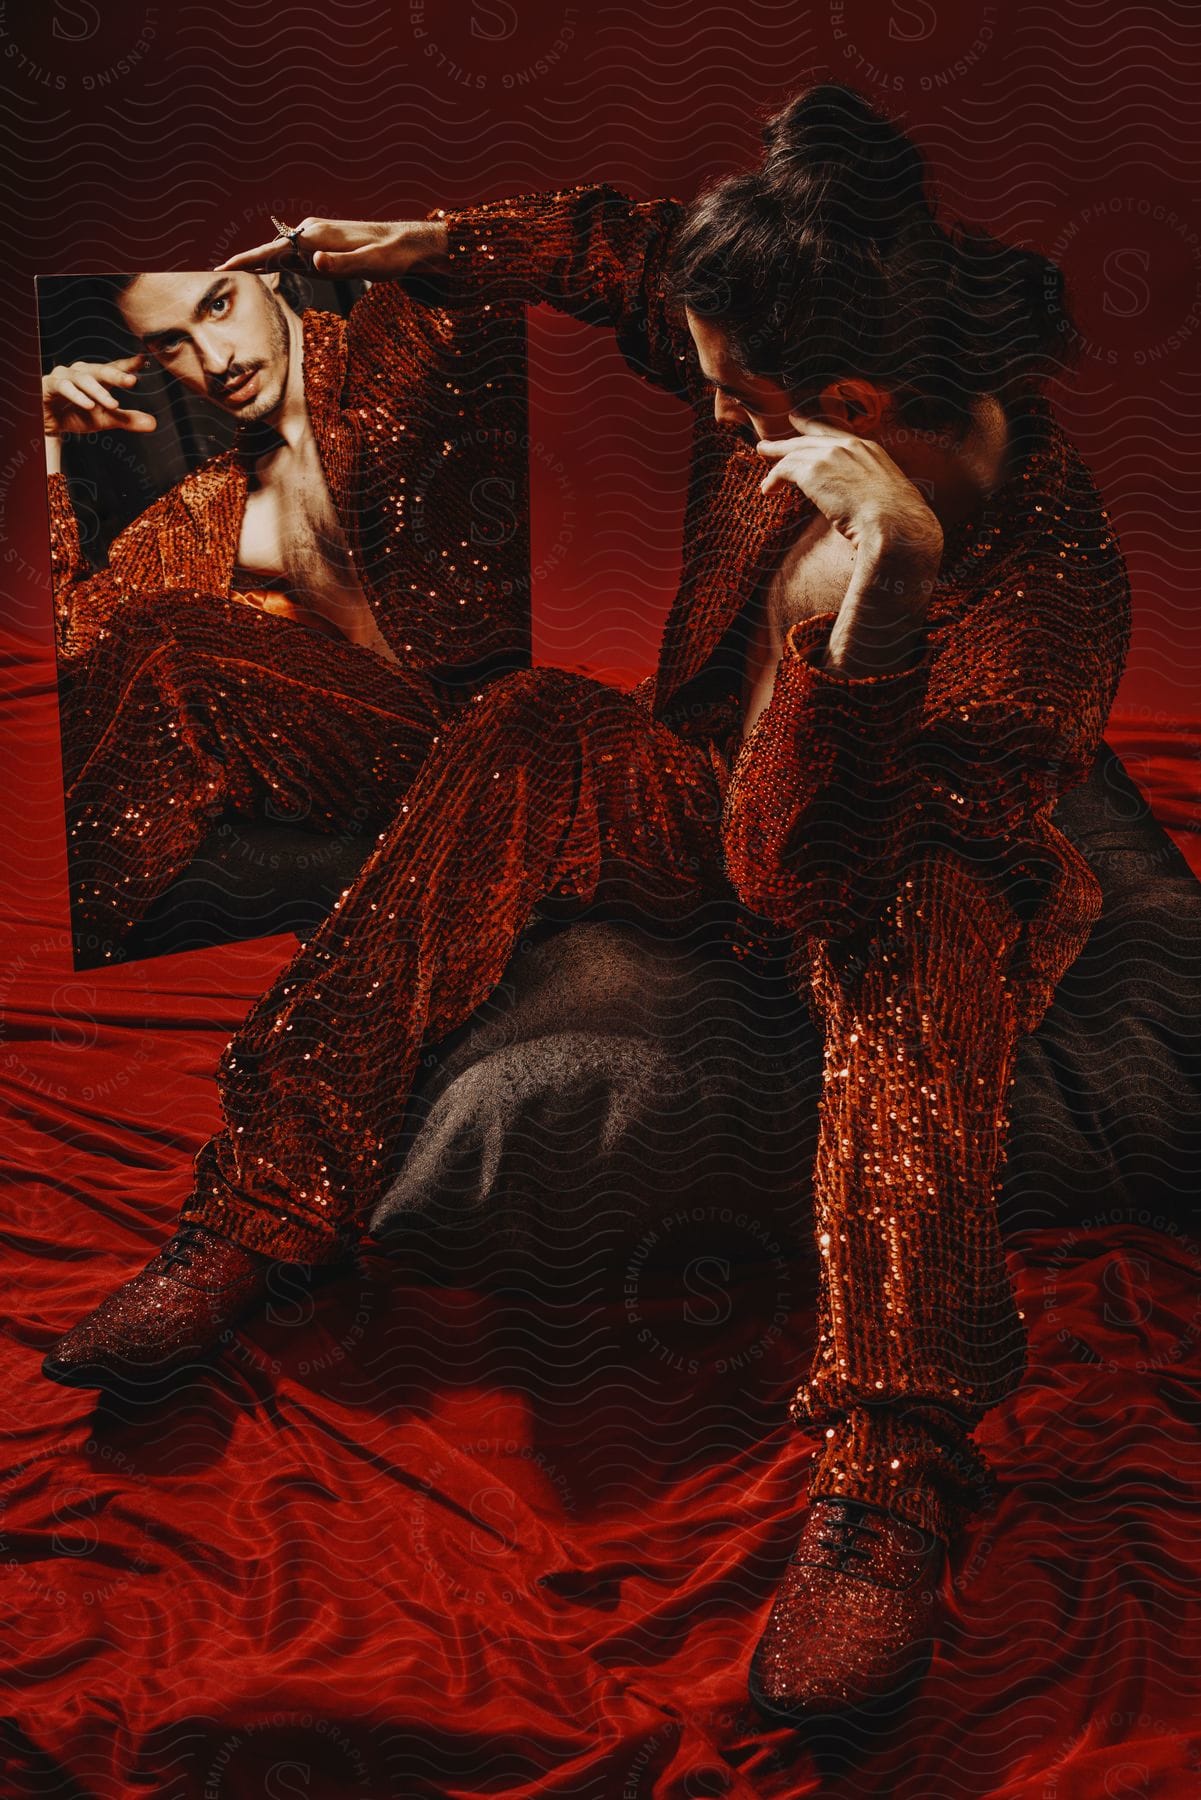 A male model dressed in sequin clothes admiring himself in a mirror.